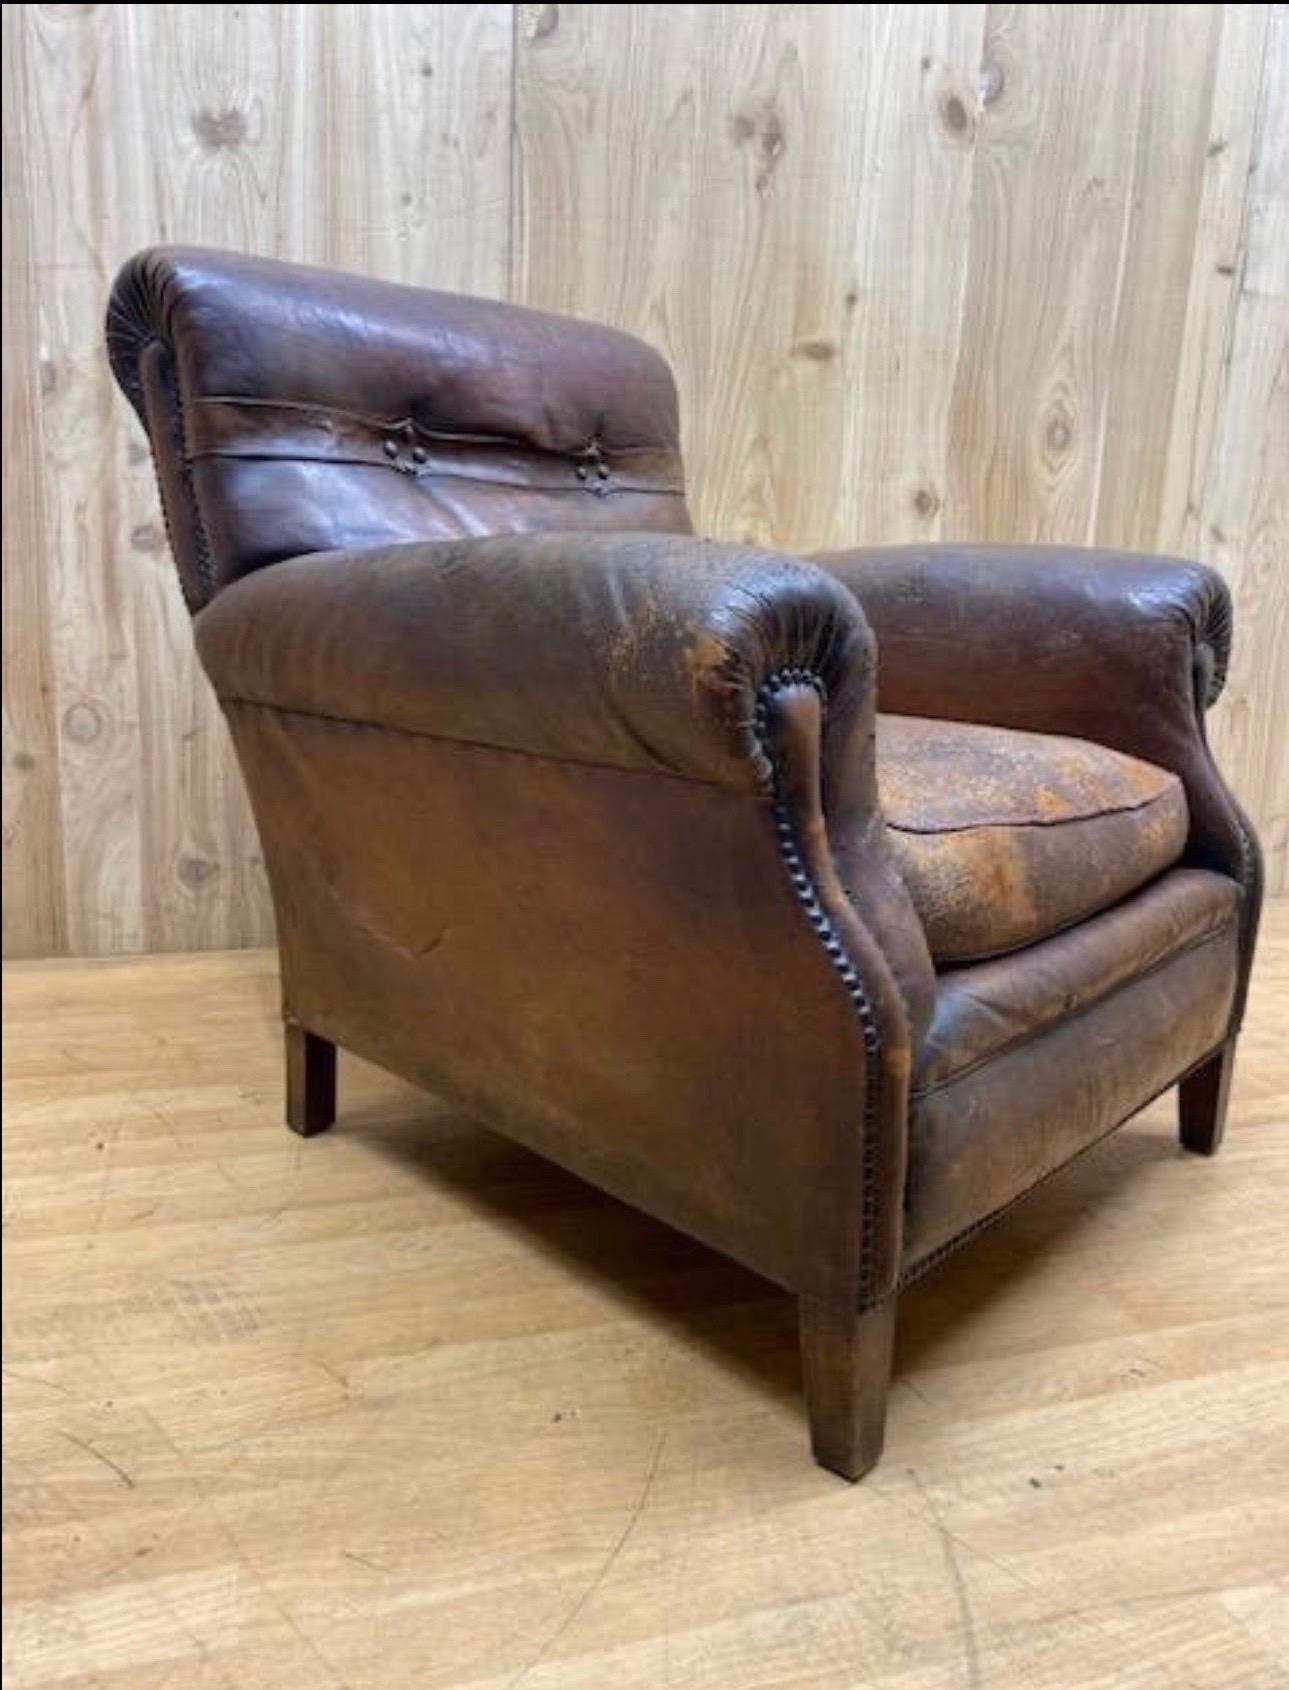 French Art Deco Distressed Brown Leather Club Chair

The Lounge is being offered with it’s original distressed leather with nicely worn patina adding to its chic look and style. 
 
circa 1930

H 35